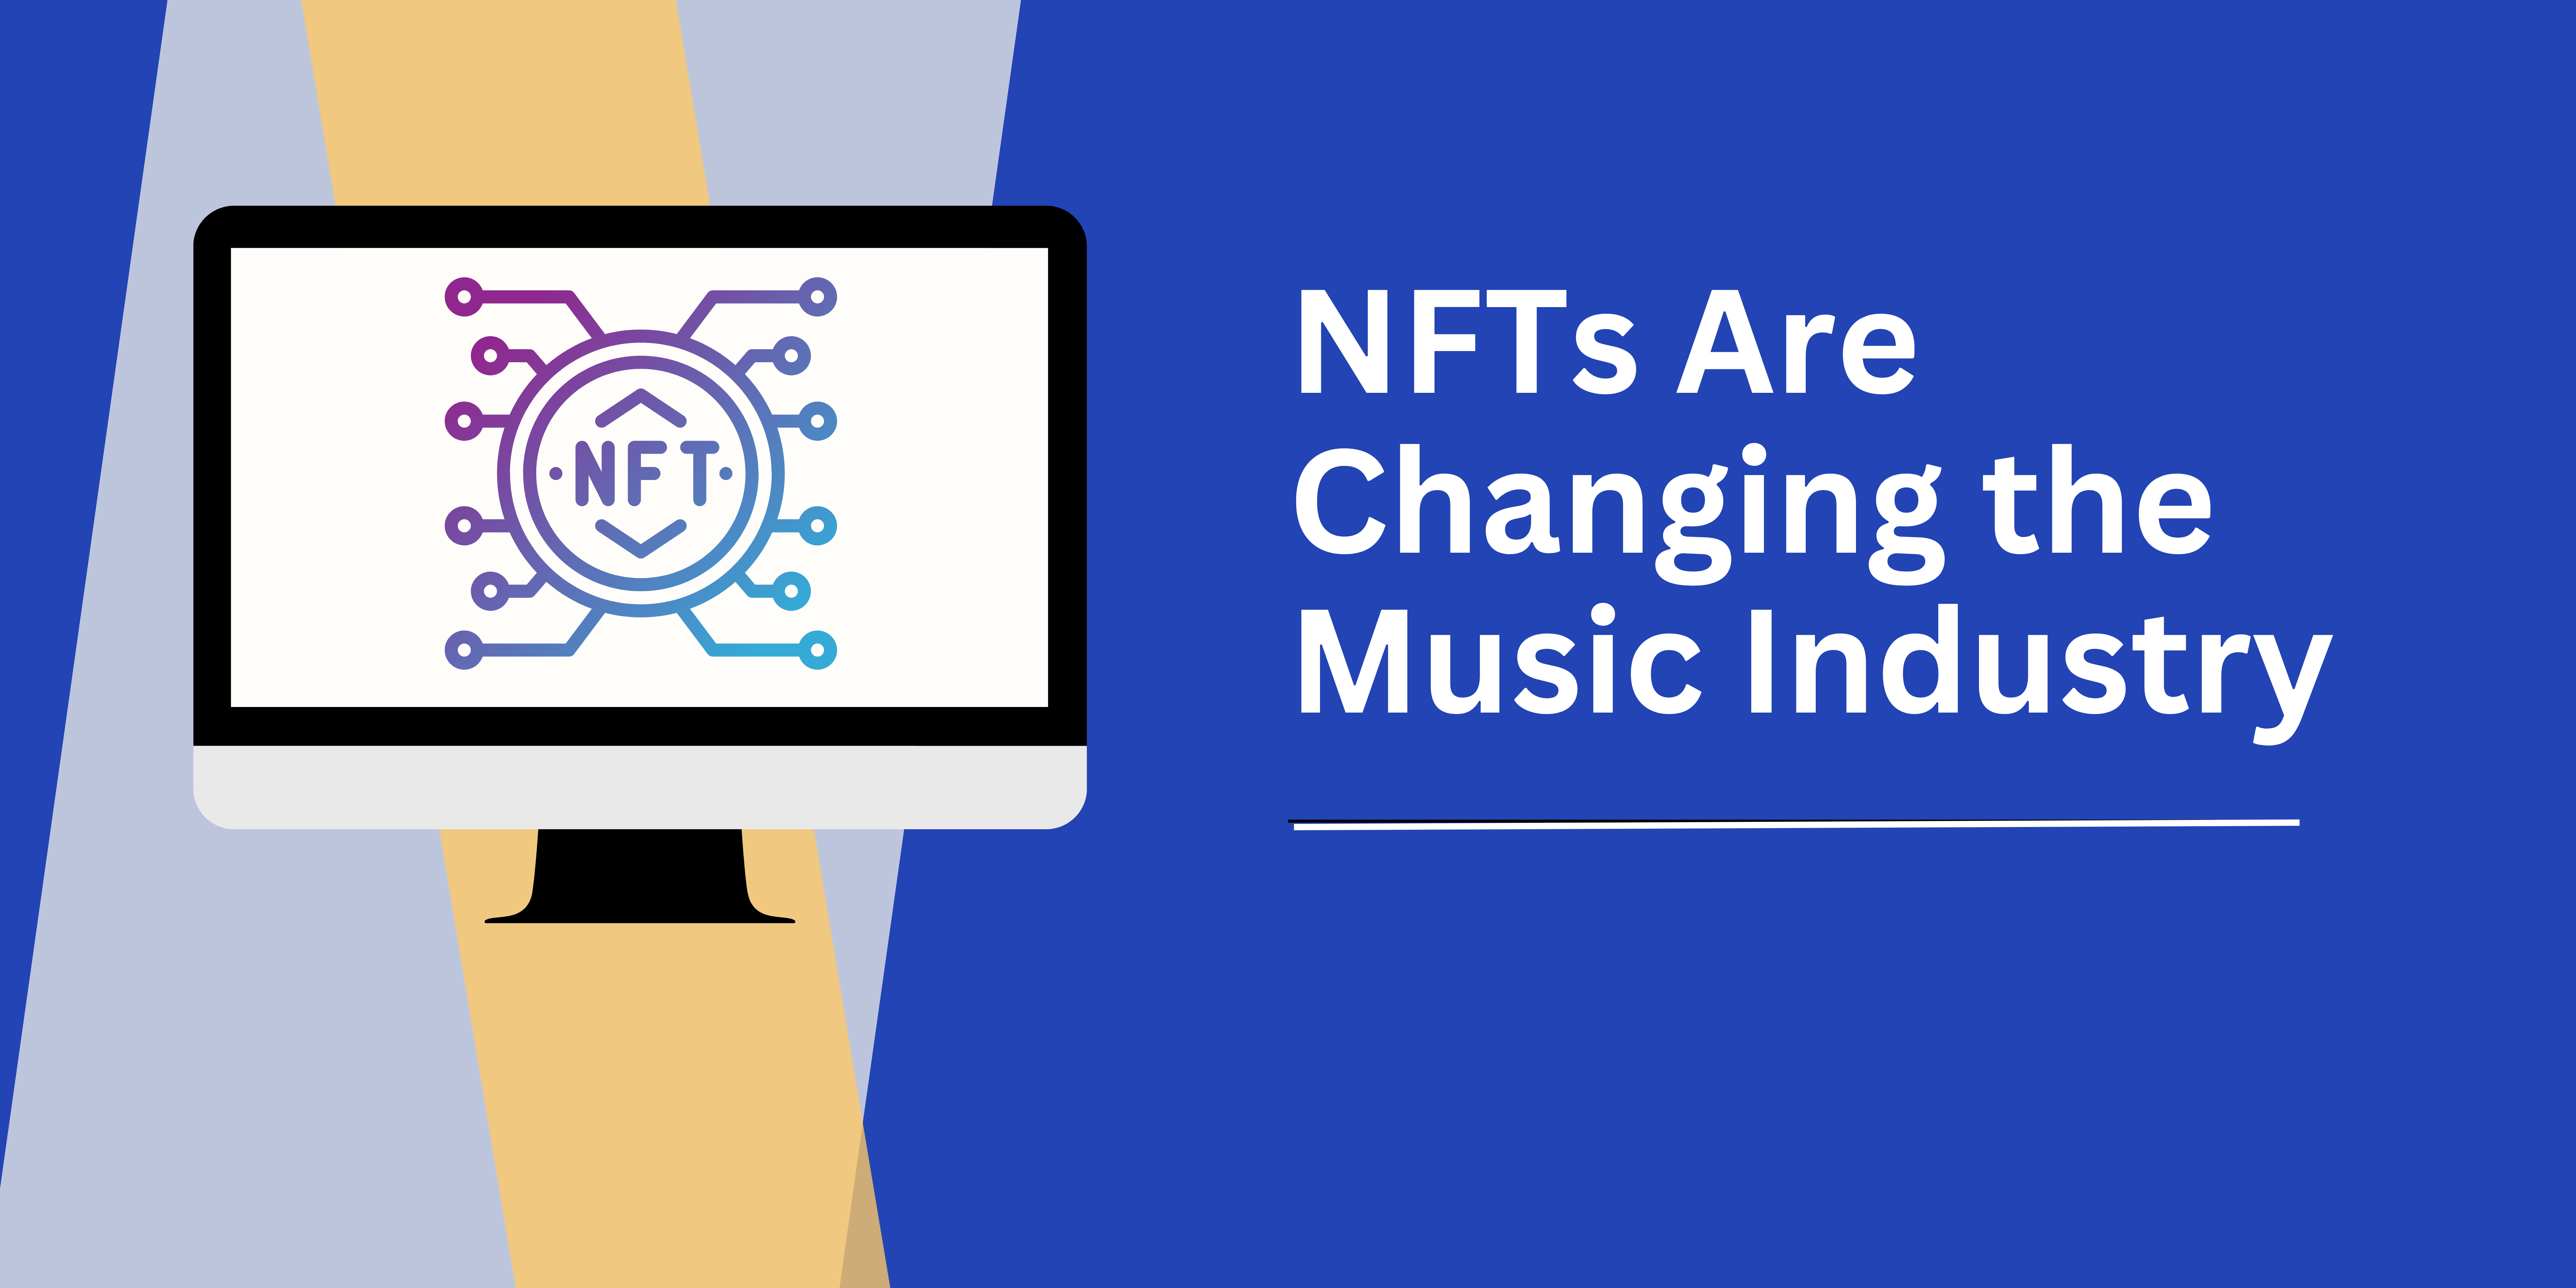 How NFTs Are Changing the Music Industry